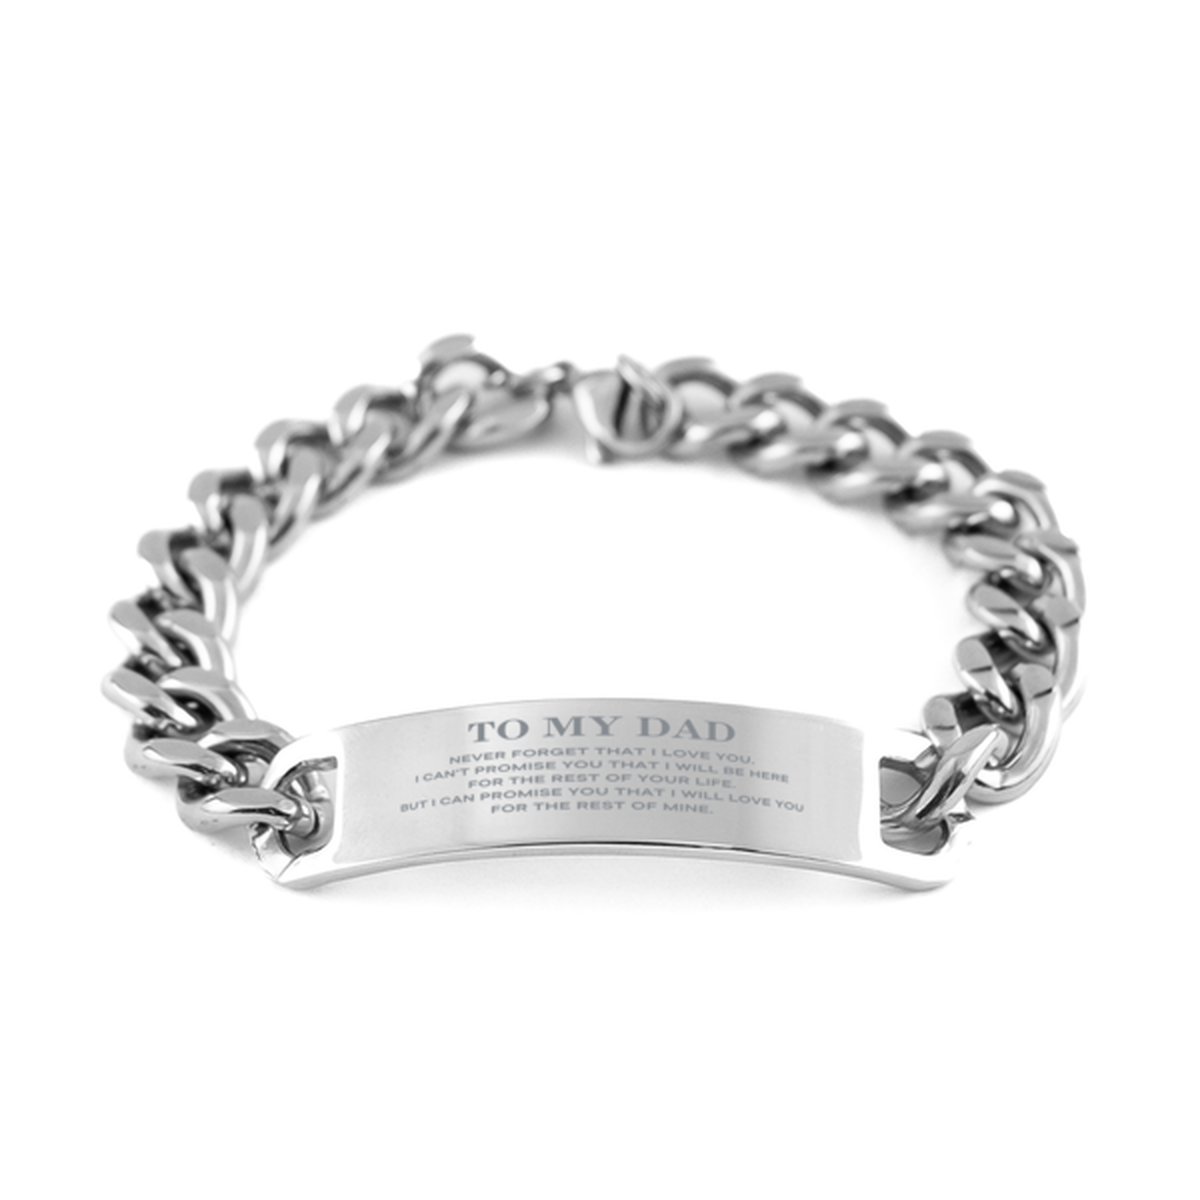 To My Dad Gifts, I will love you for the rest of mine, Love Dad Bracelet, Birthday Christmas Unique Cuban Chain Stainless Steel Bracelet For Dad